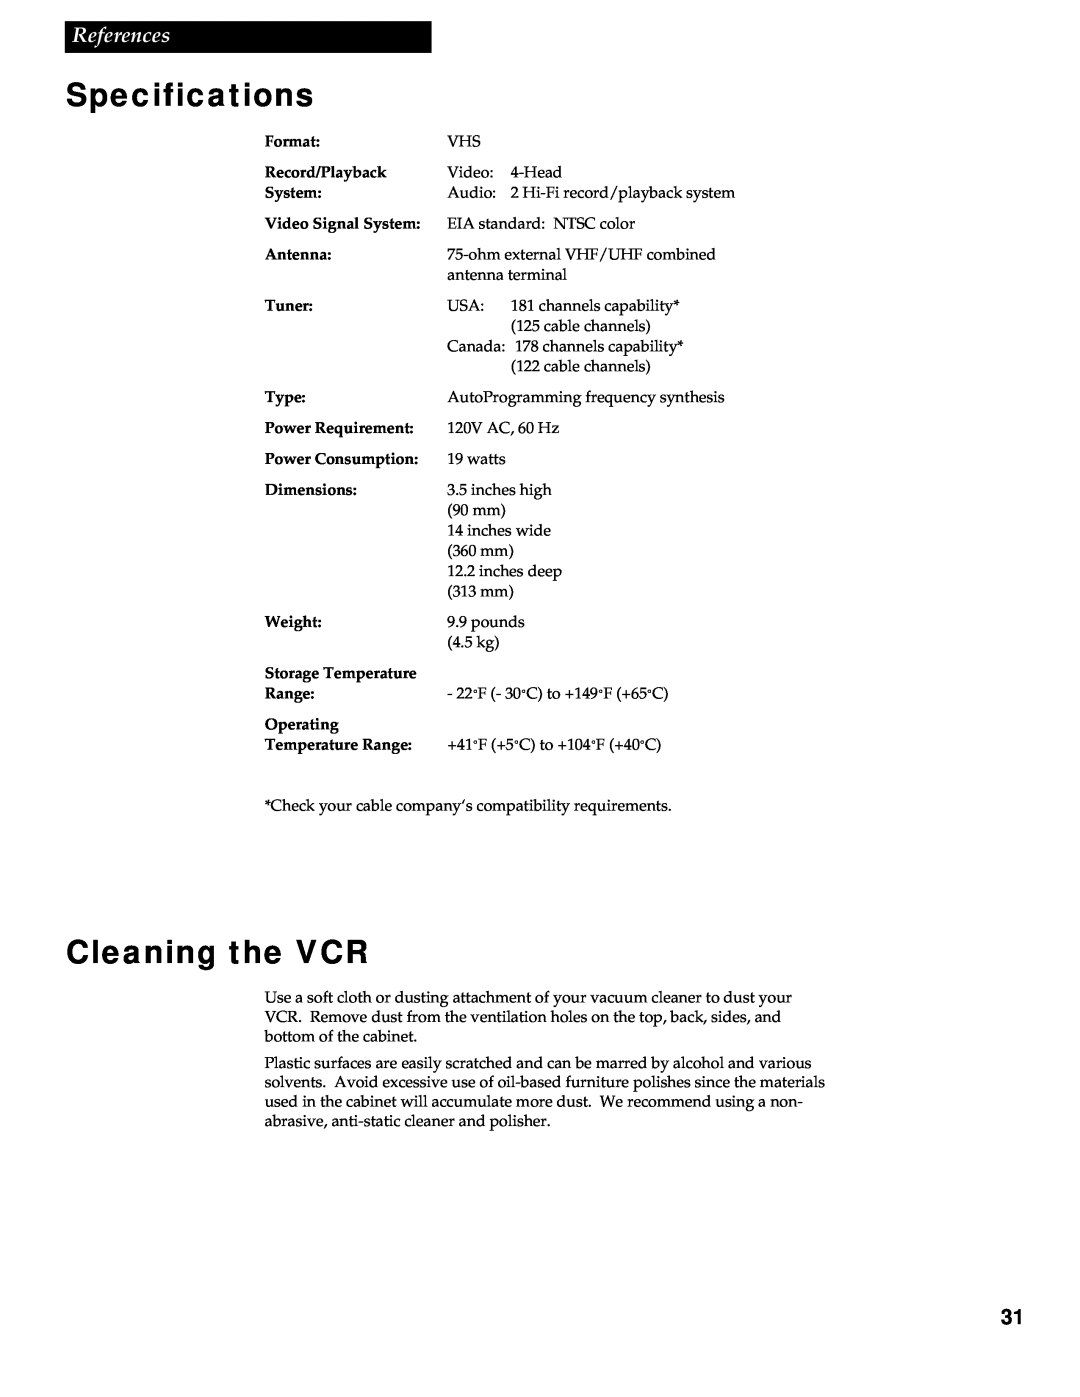 RCA VR609HF manual Specifications, Cleaning the VCR, References 